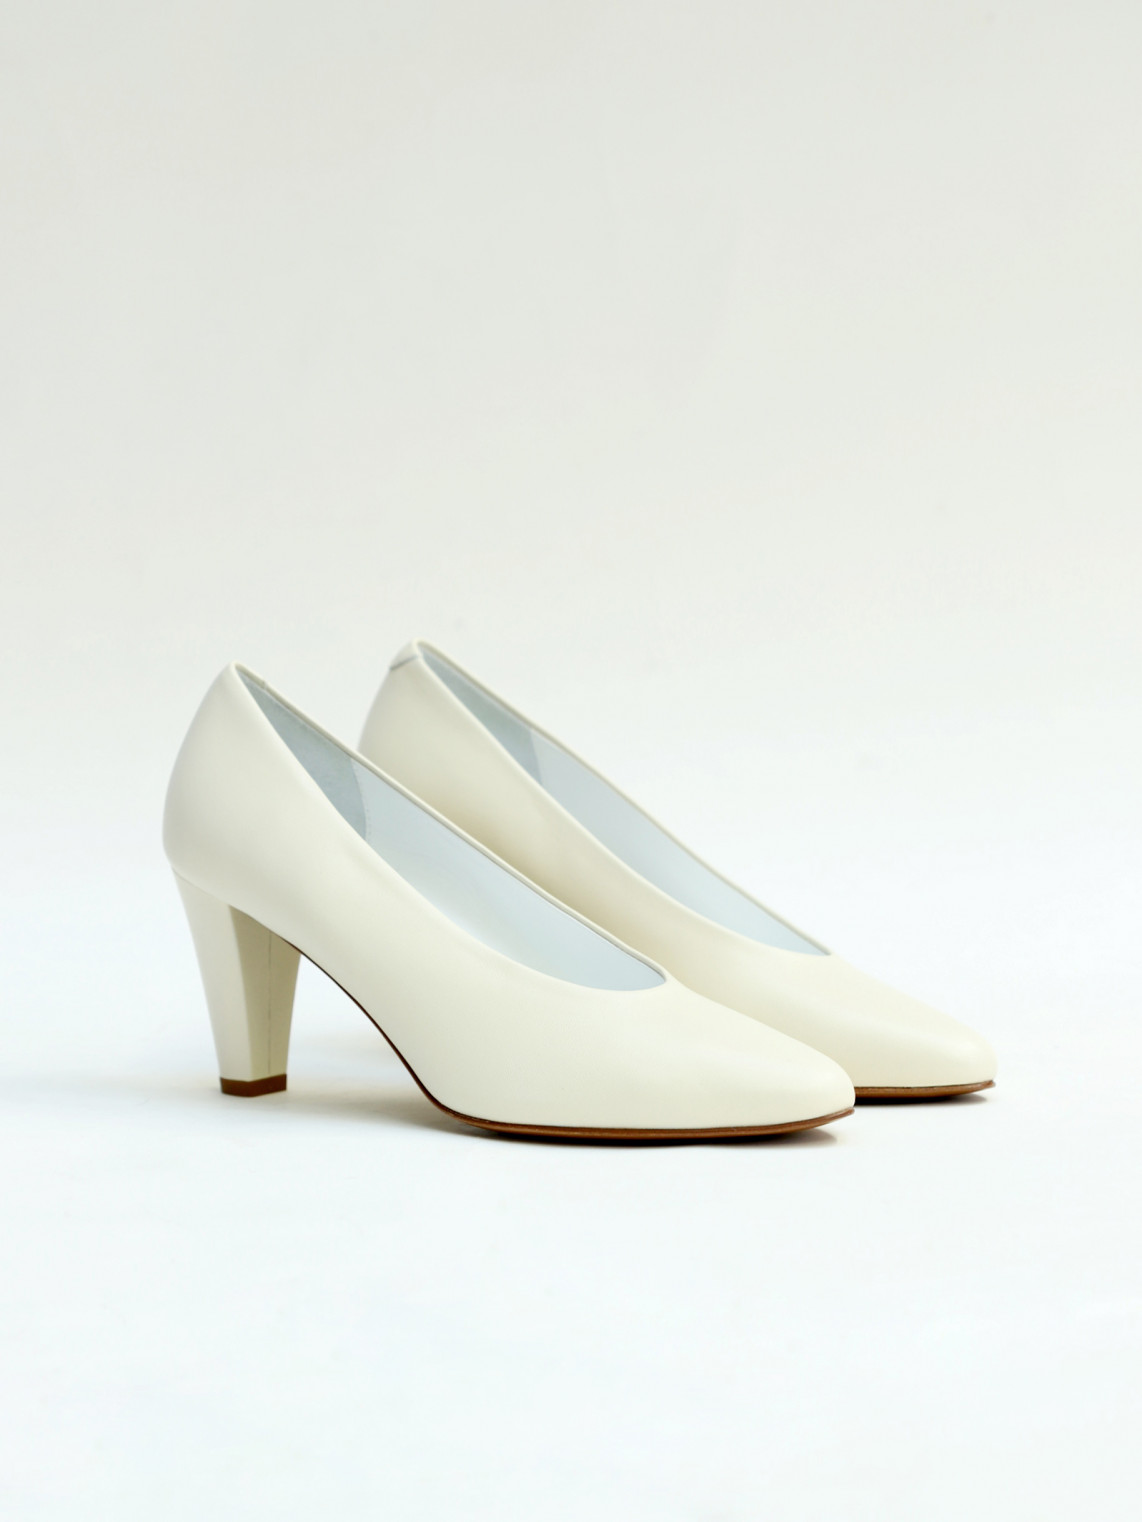 Ivory leather pumps